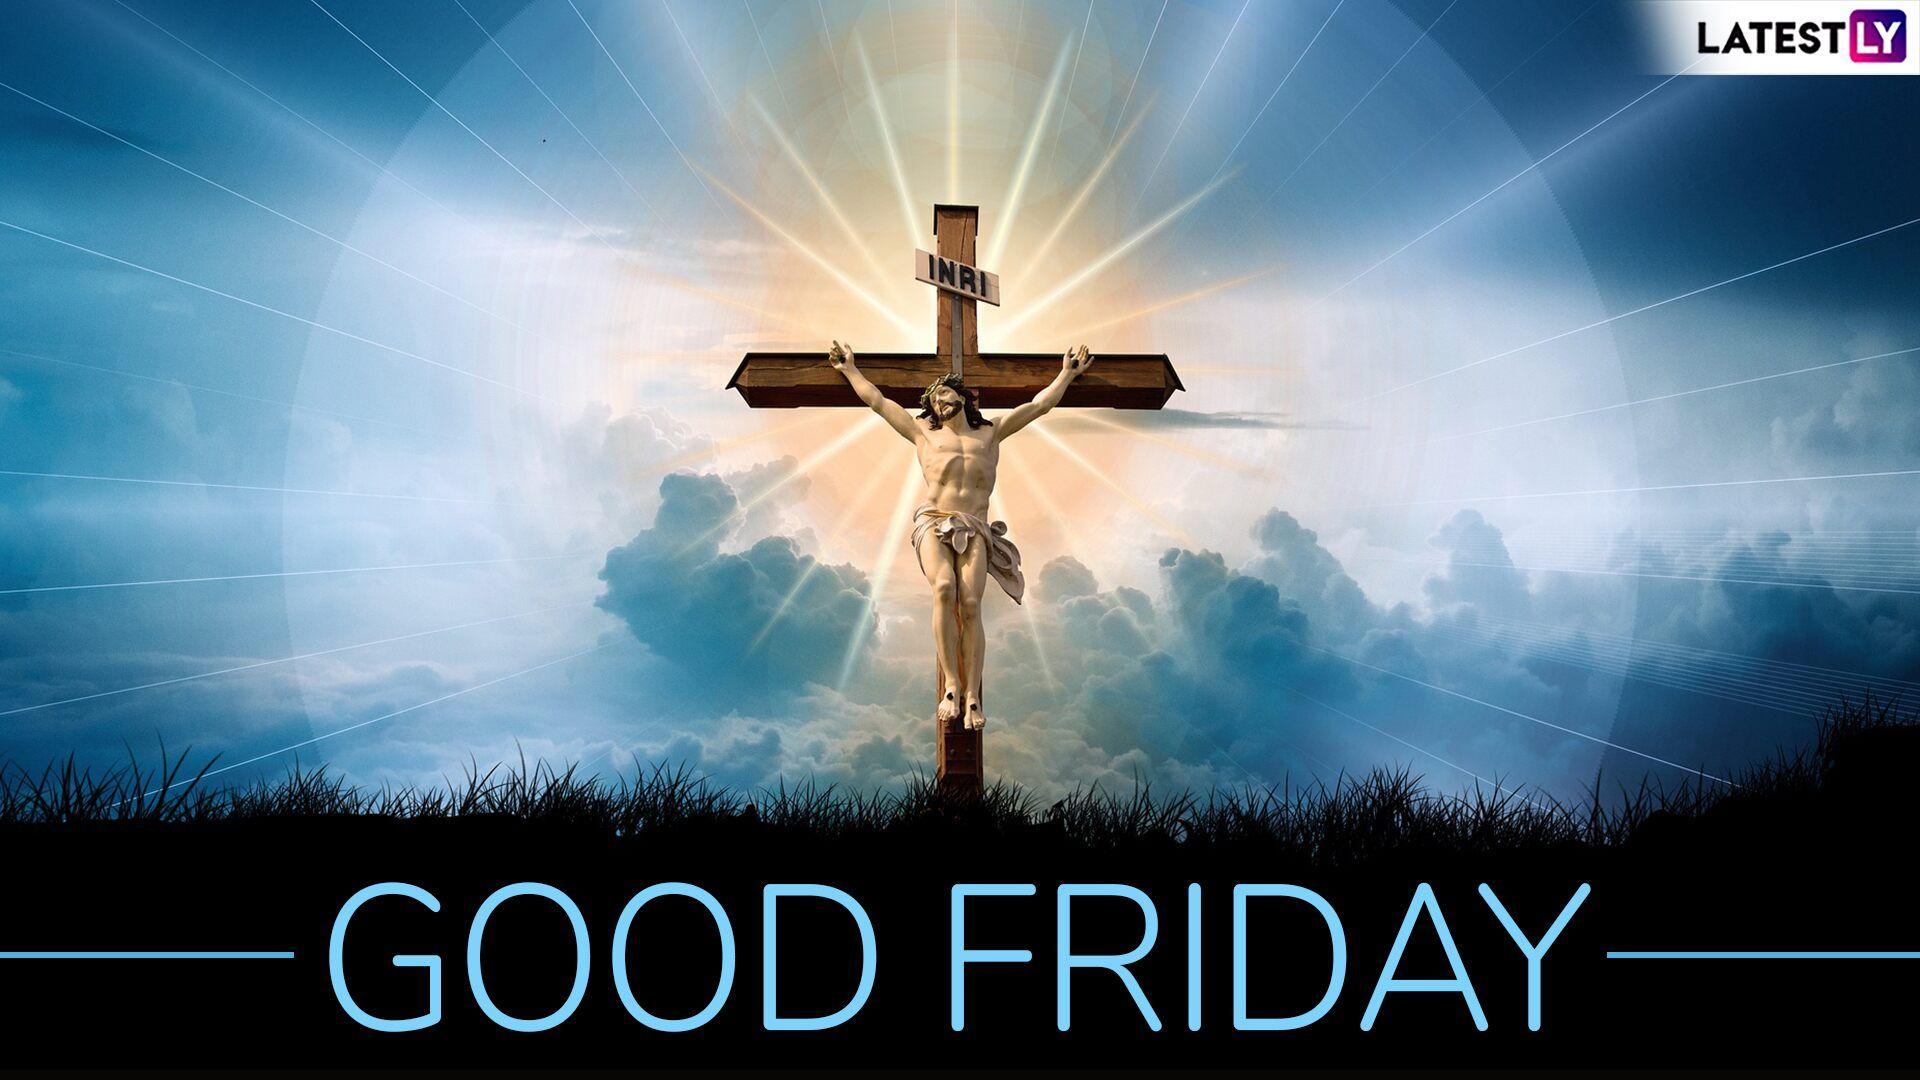 1920x1080 Good Friday Image for Free Download Online: Send Good Friday 2019